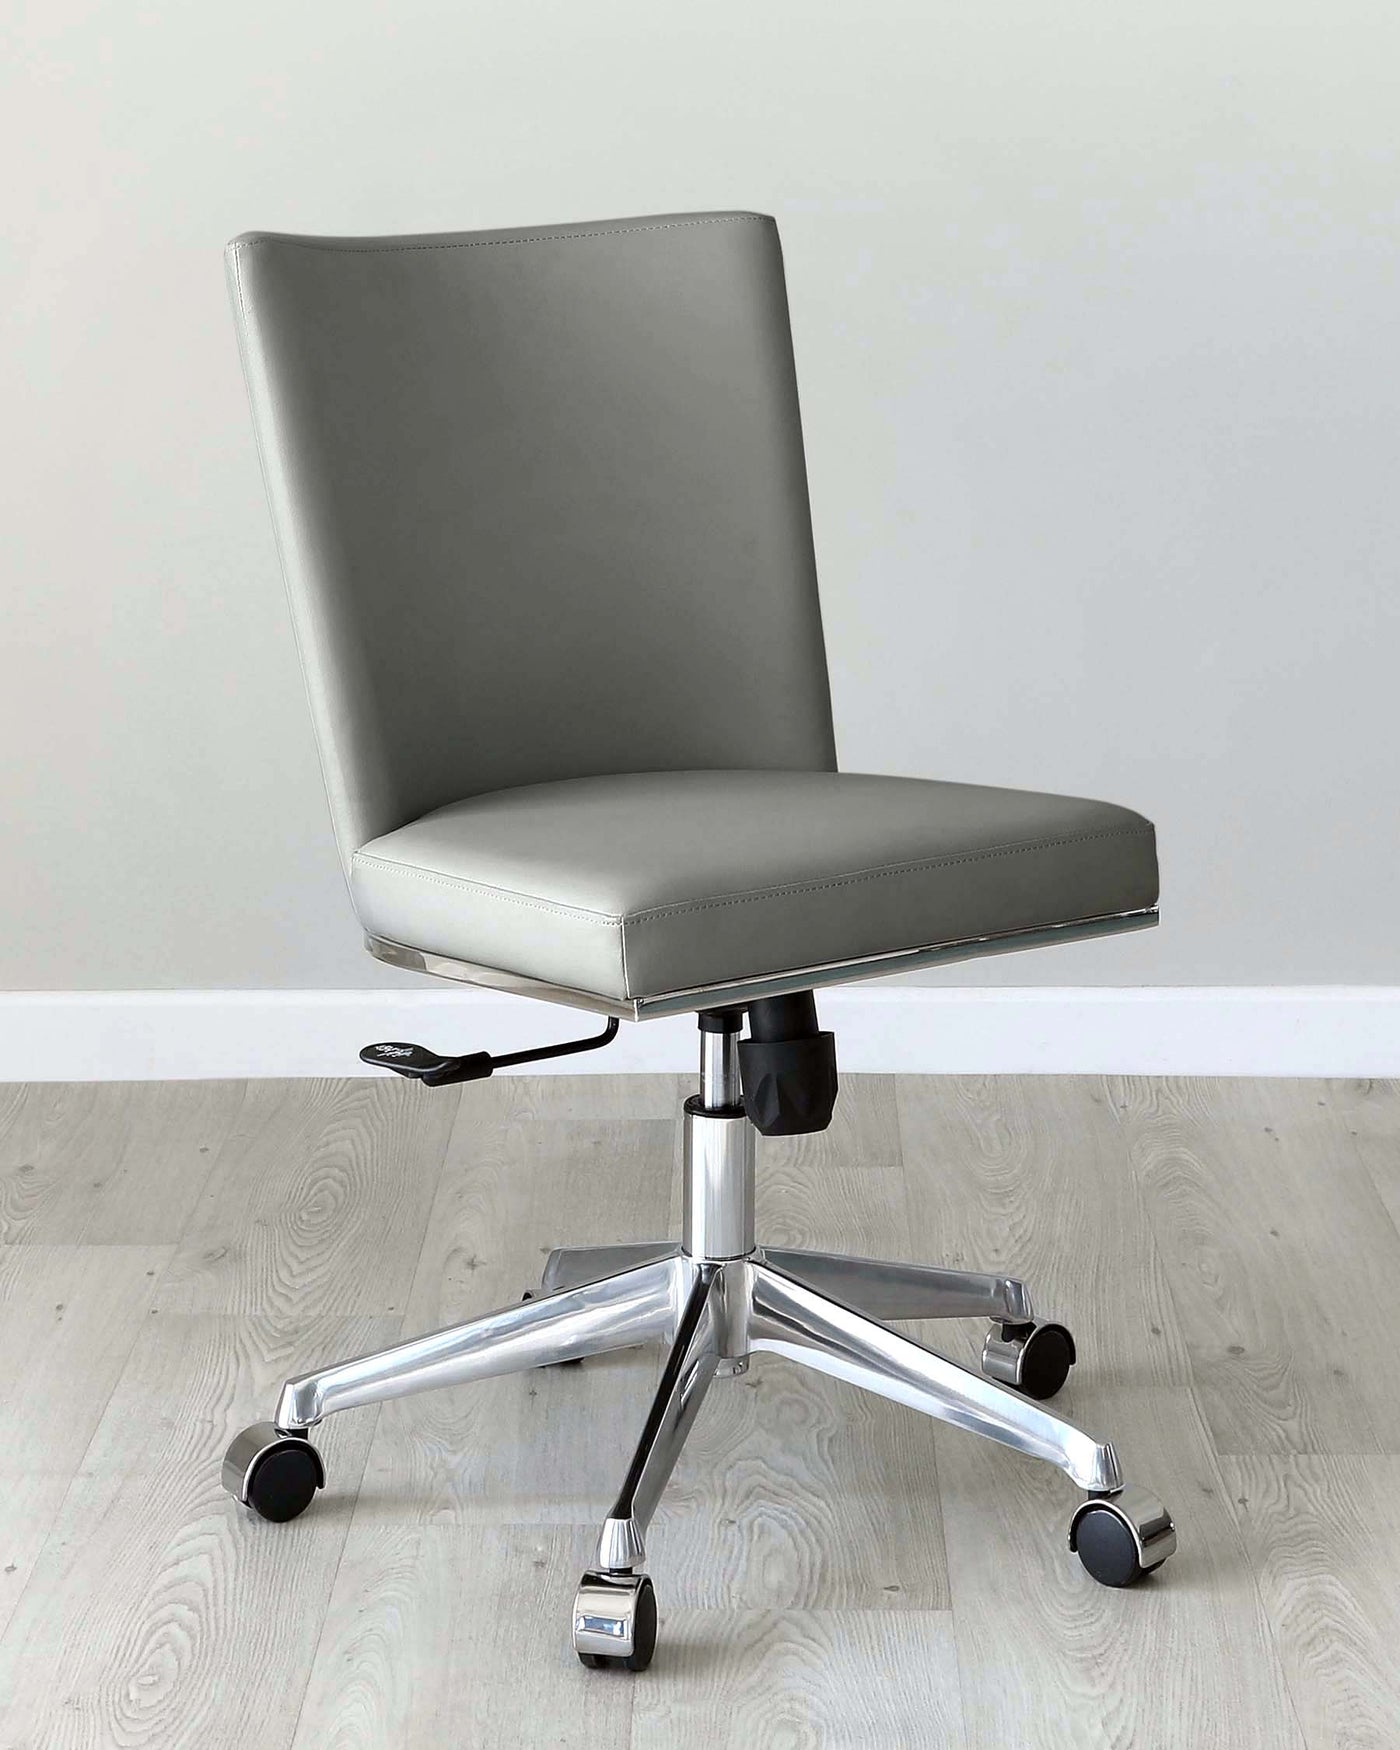 Modern office chair with a high back, upholstered in grey leatherette, featuring a streamlined design, an adjustable height lever, and a five-point chrome base with caster wheels for mobility.